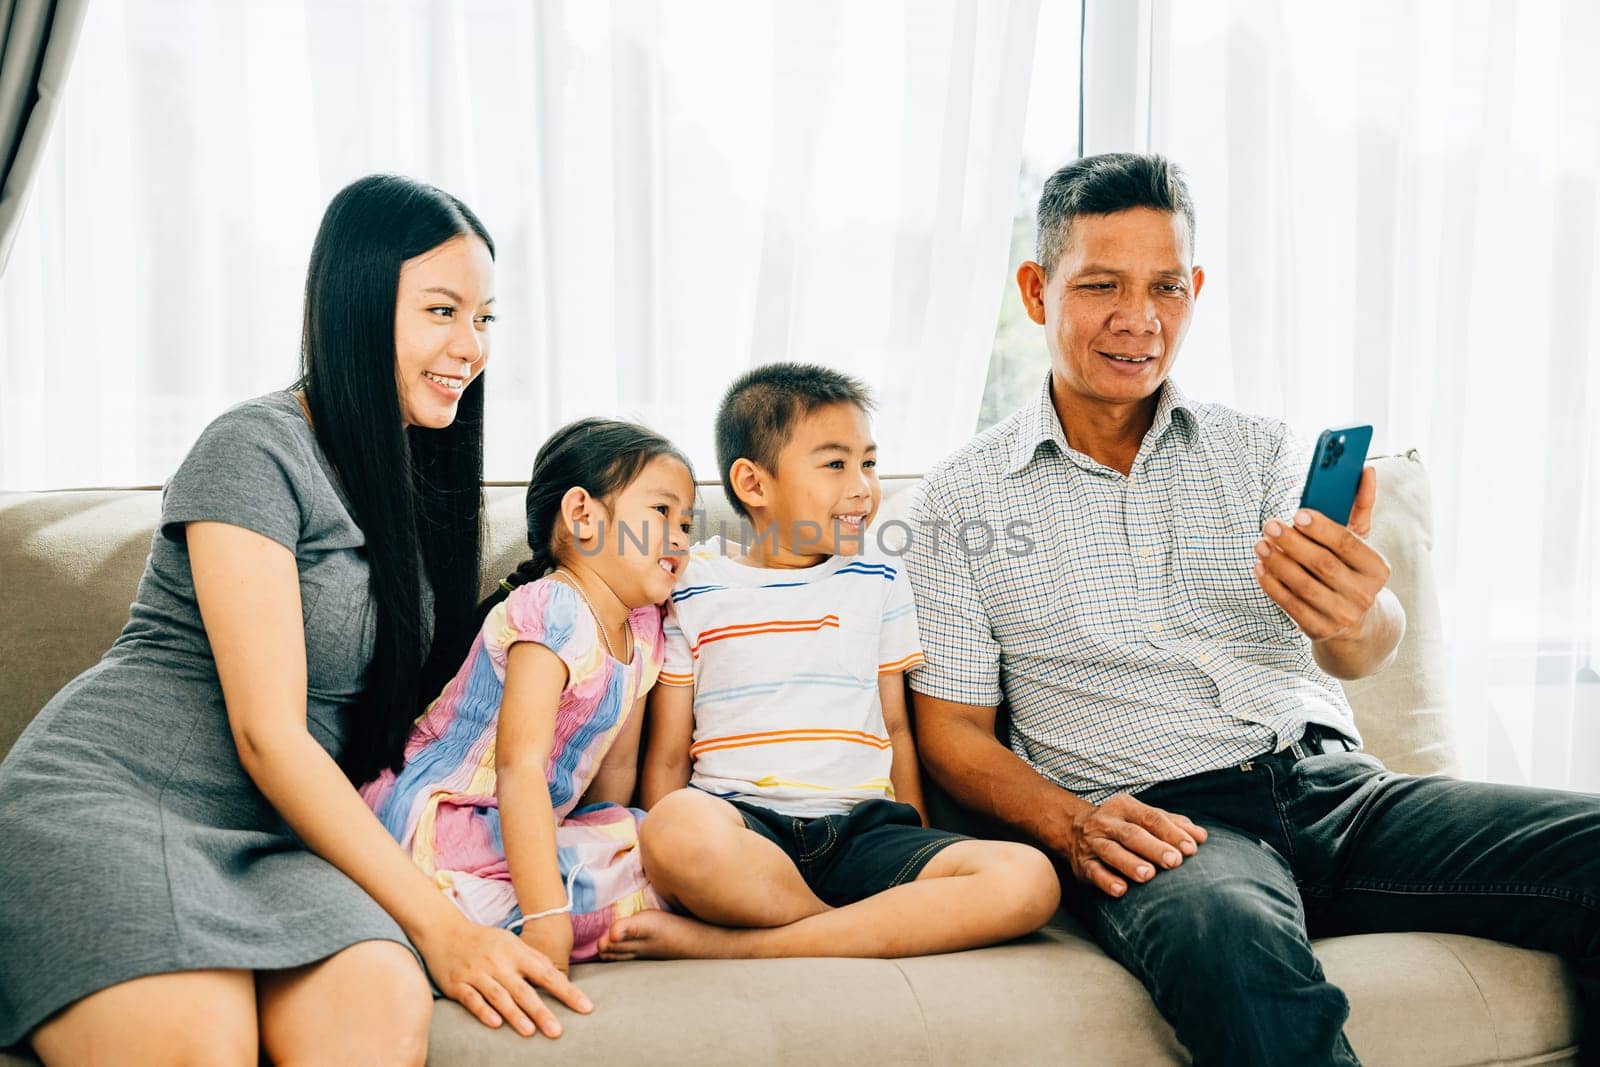 A happy family gathers on a couch kids entertained with a smartphone video parents and children enjoying mobile apps. Illustrating familial joy bonding and technology's role in shared happiness.